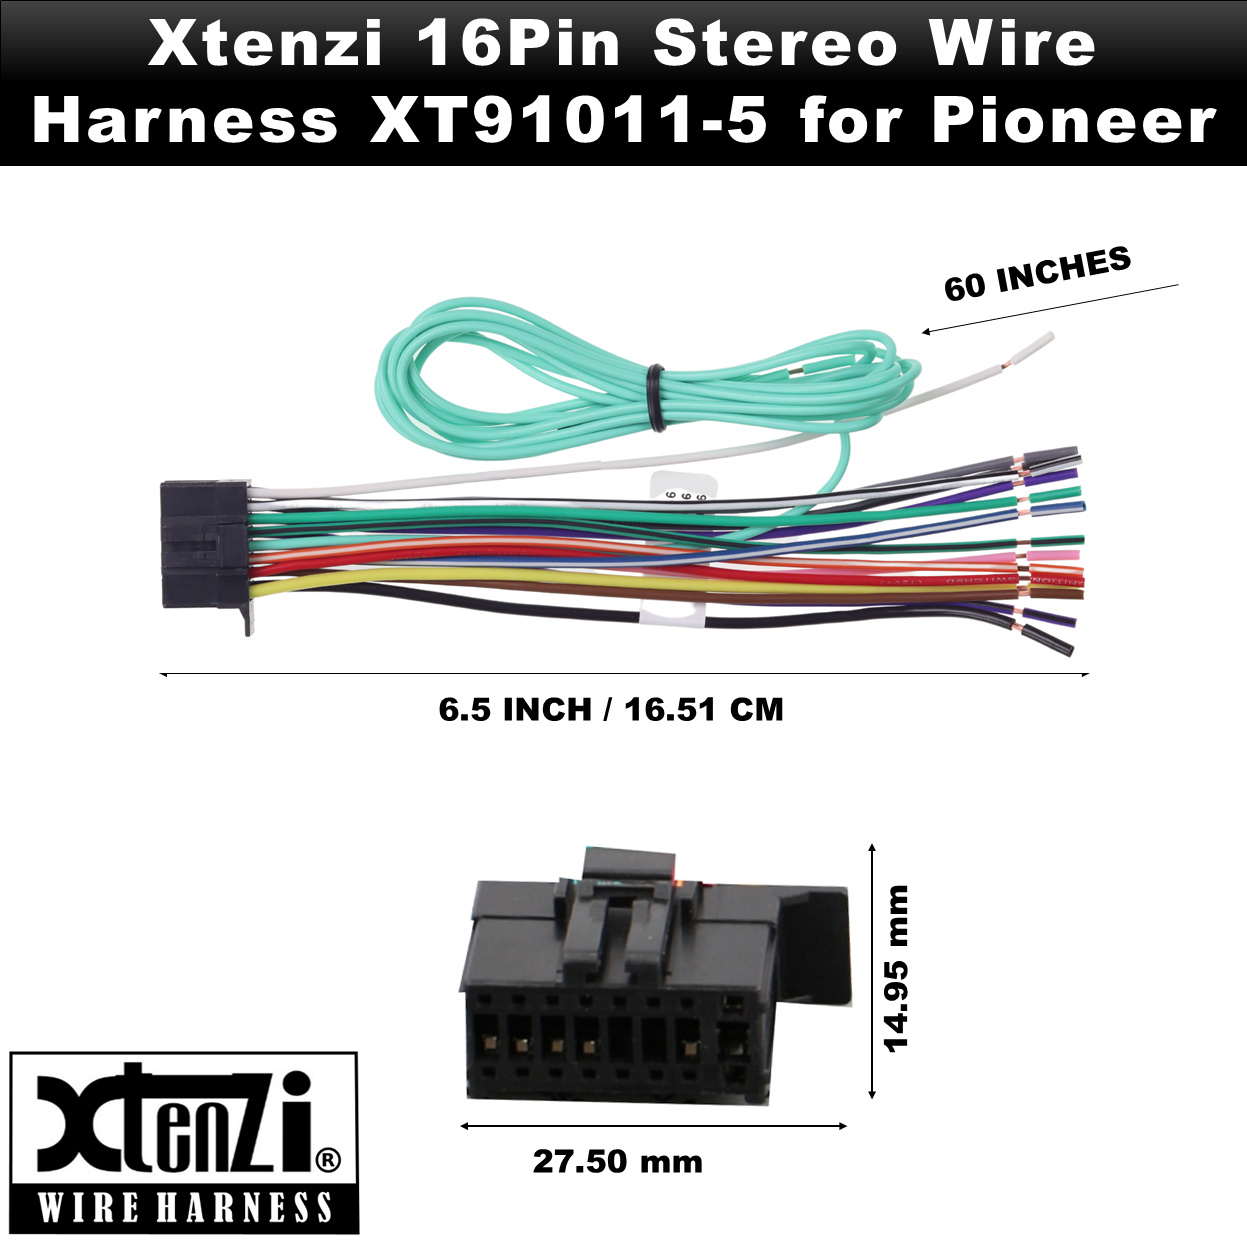 Xtenzi 16Pin Car Radio Power Wire Harness Connector Compatible with Pioneer BV9973 BV9976 BV9978 BV9979B BV9980BT – XT91011-5